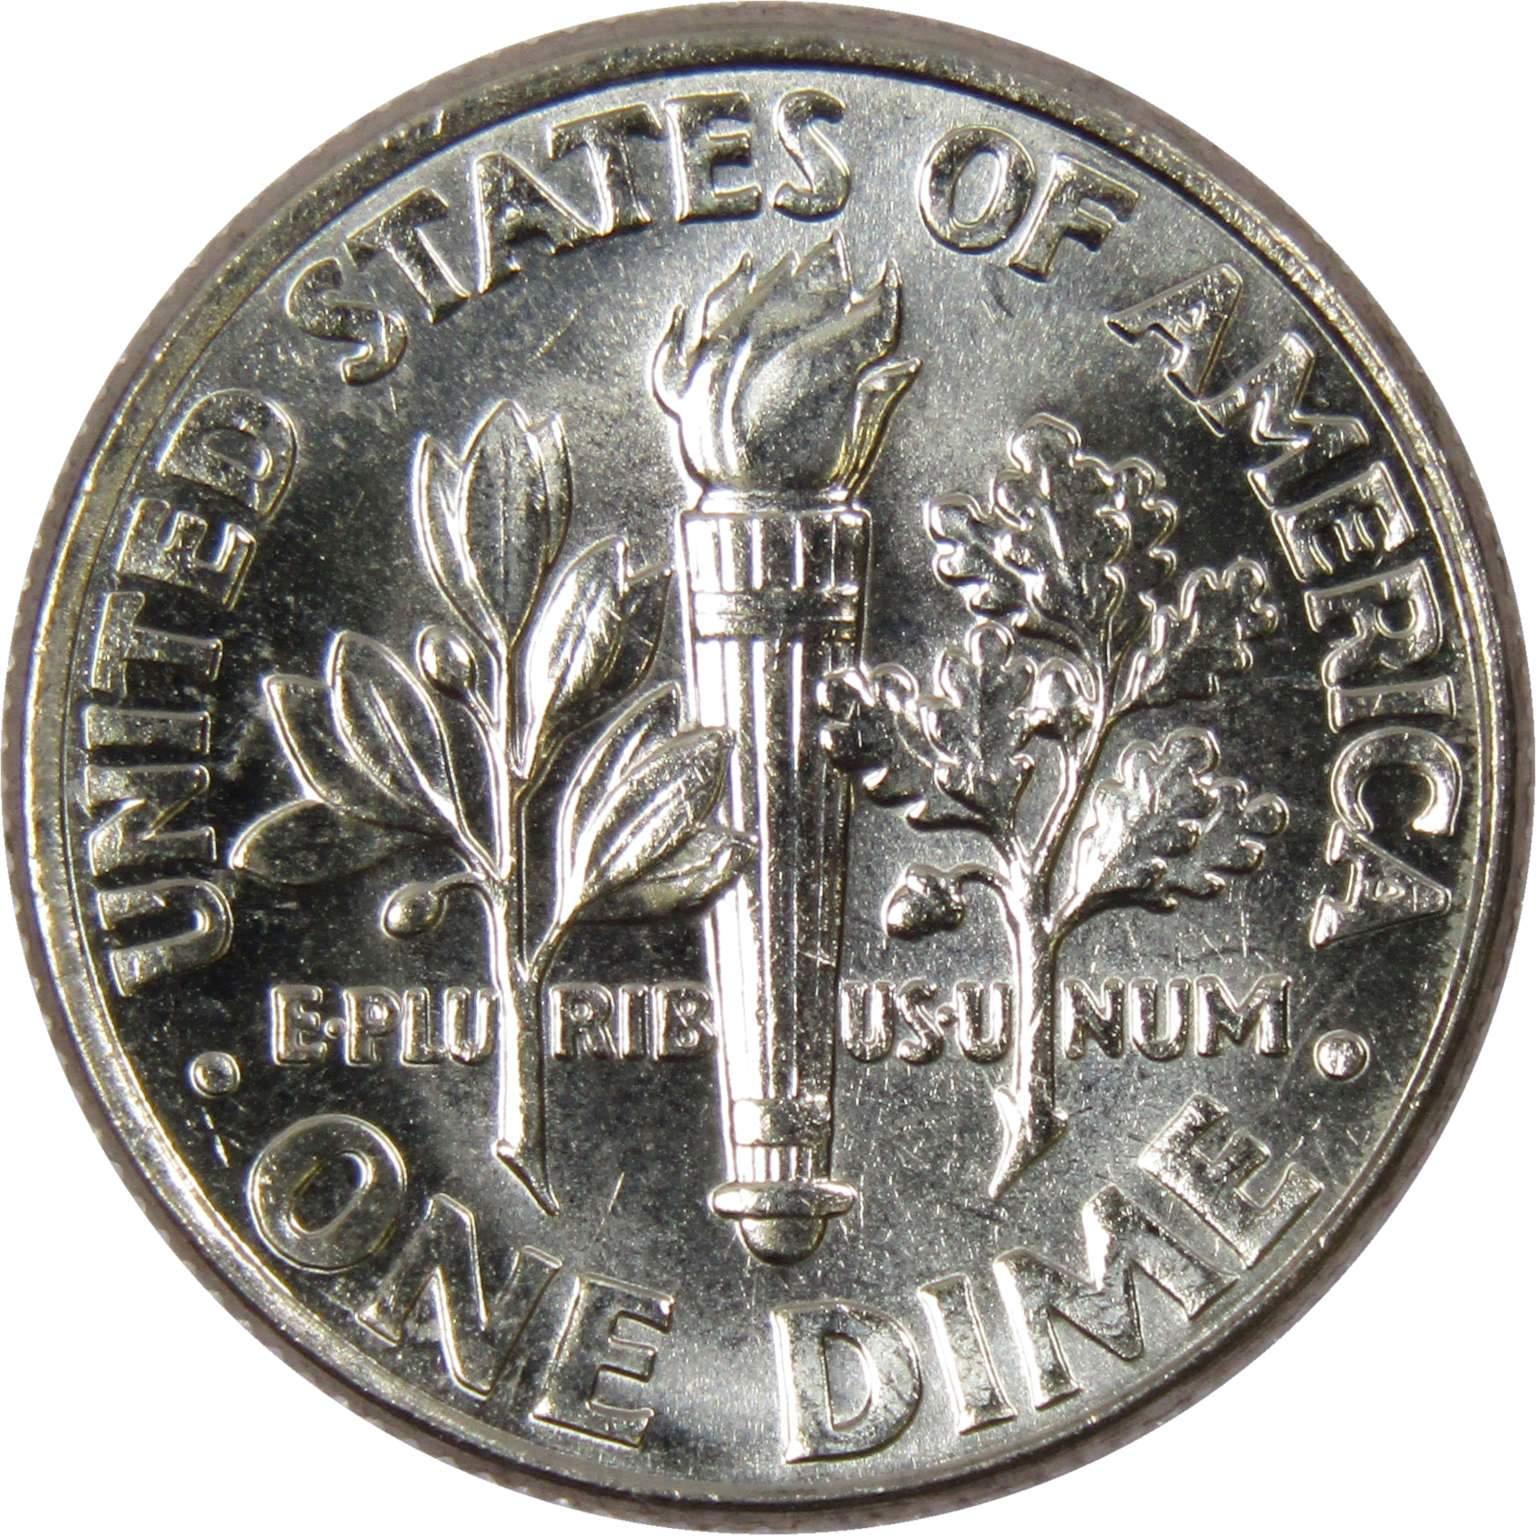 1998 D Roosevelt Dime BU Uncirculated Mint State 10c US Coin Collectible